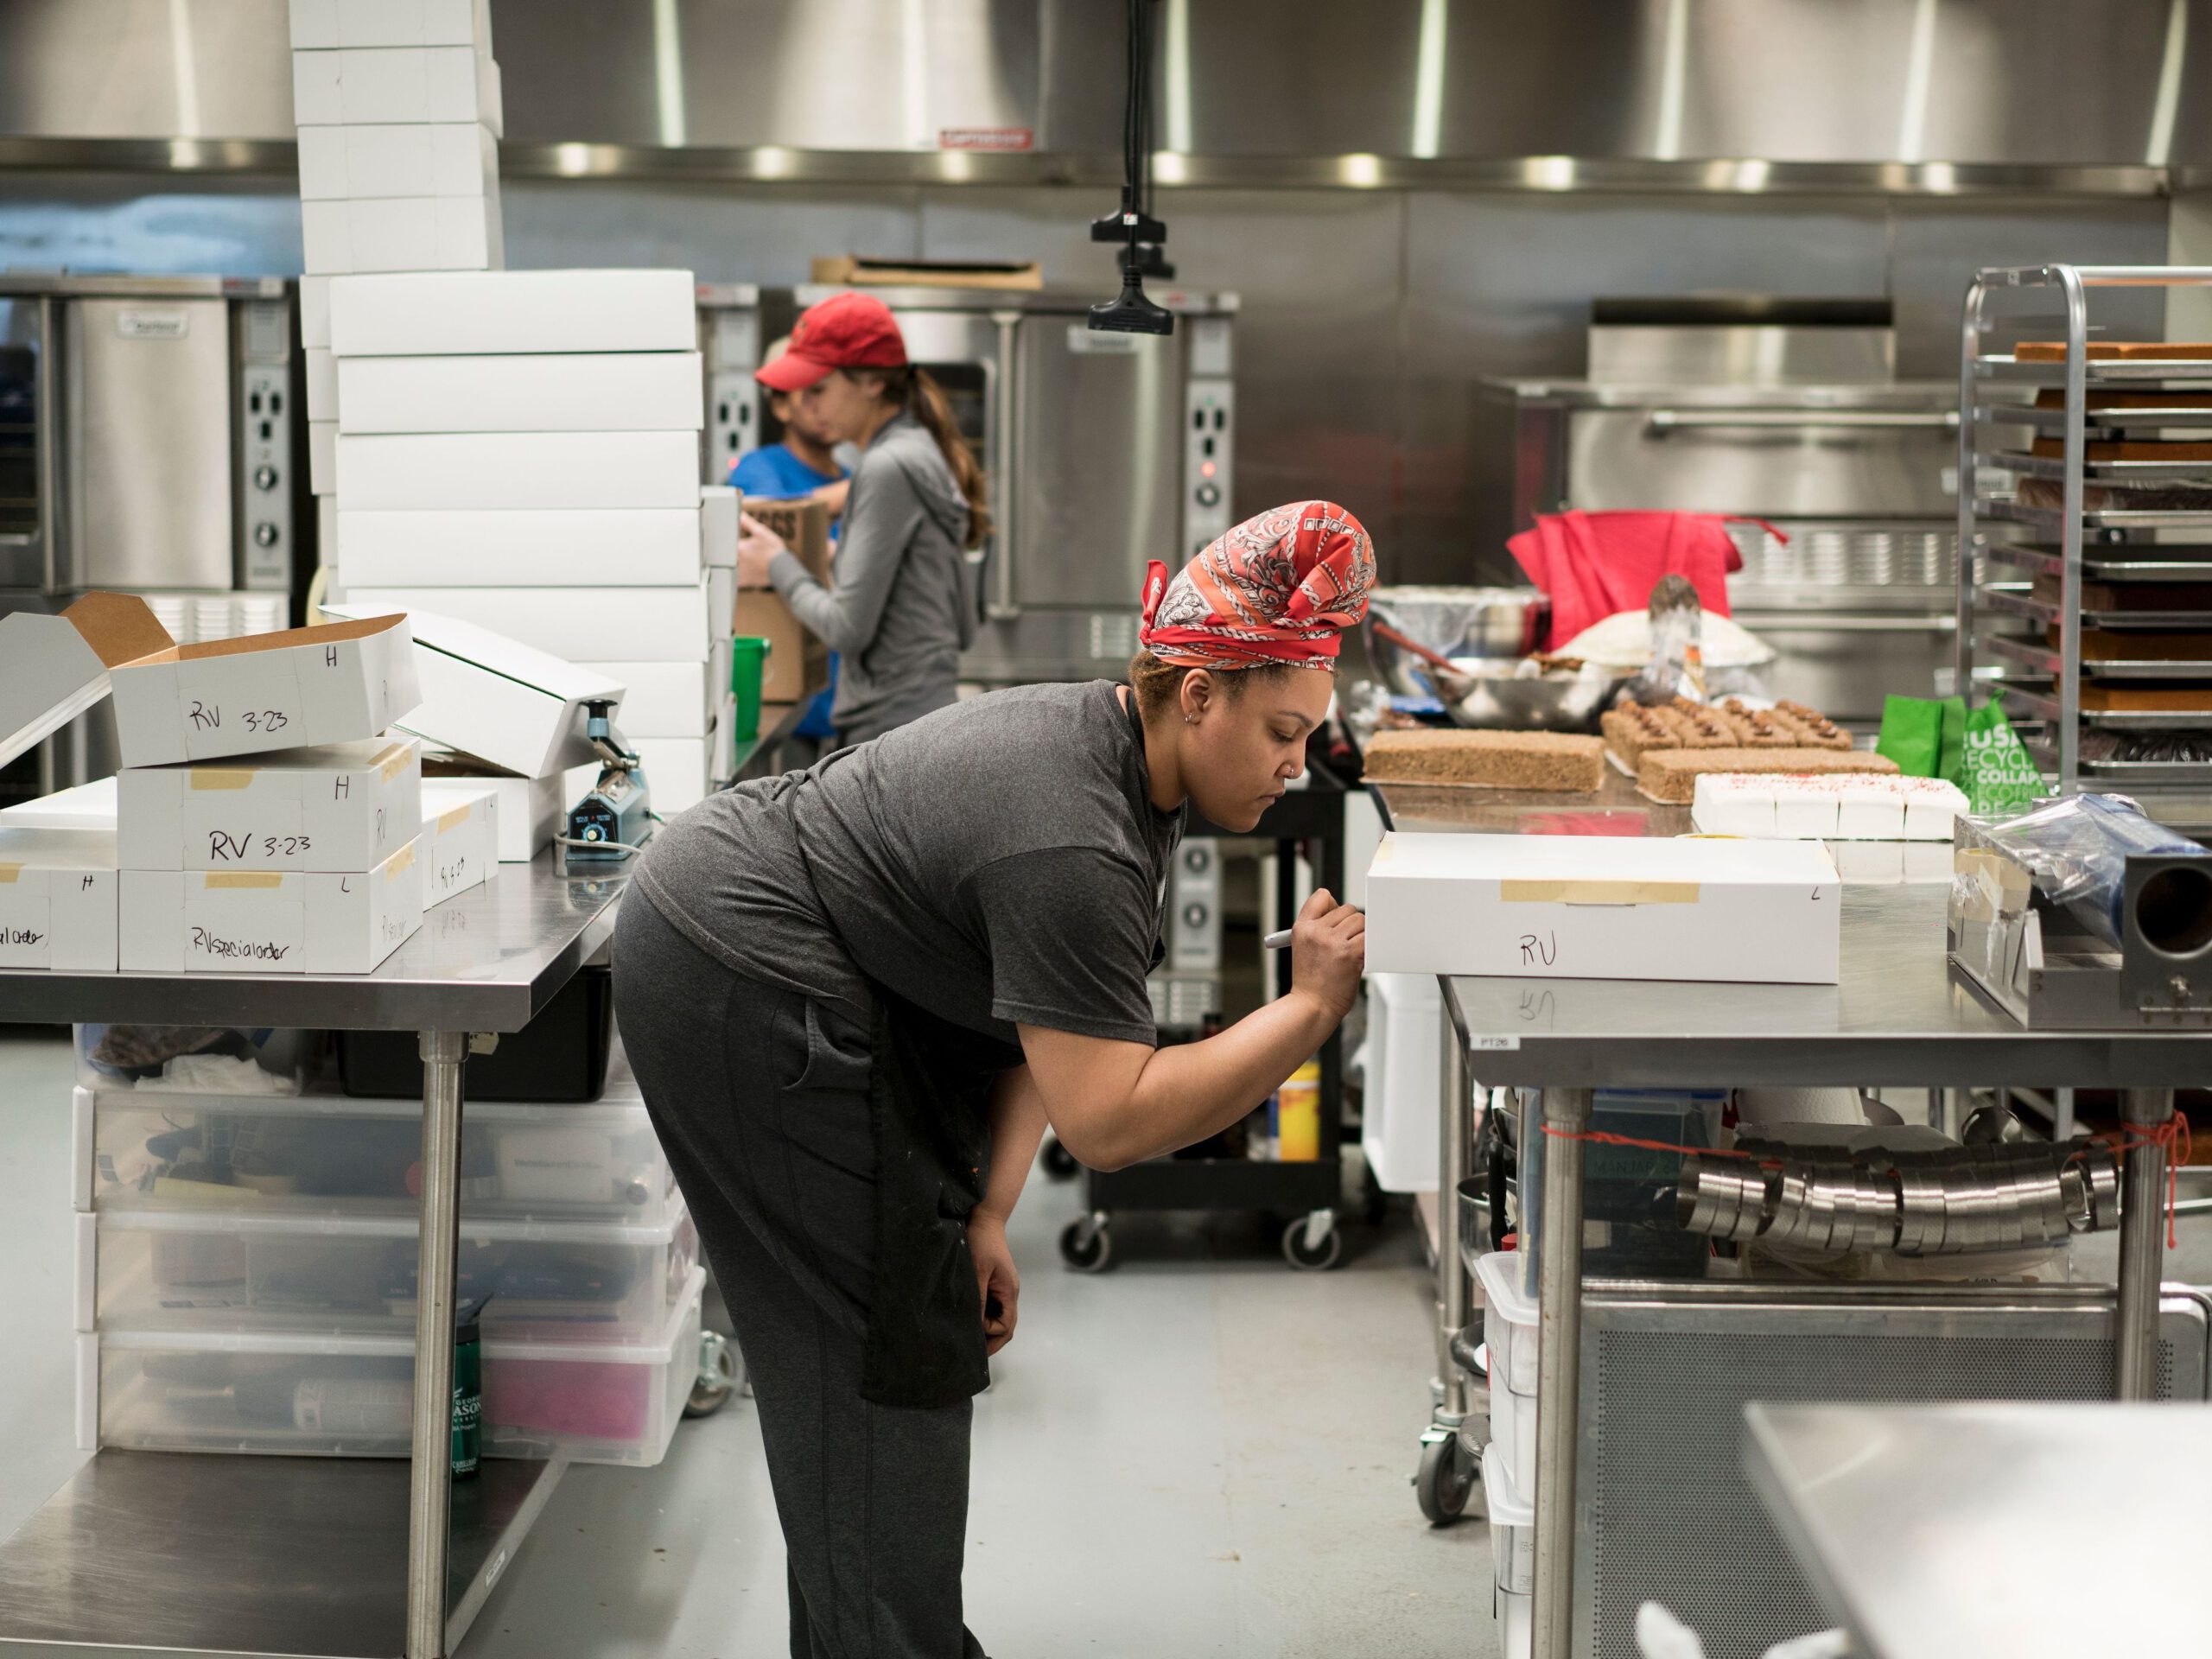 Small food businesses find community in shared kitchen spaces.